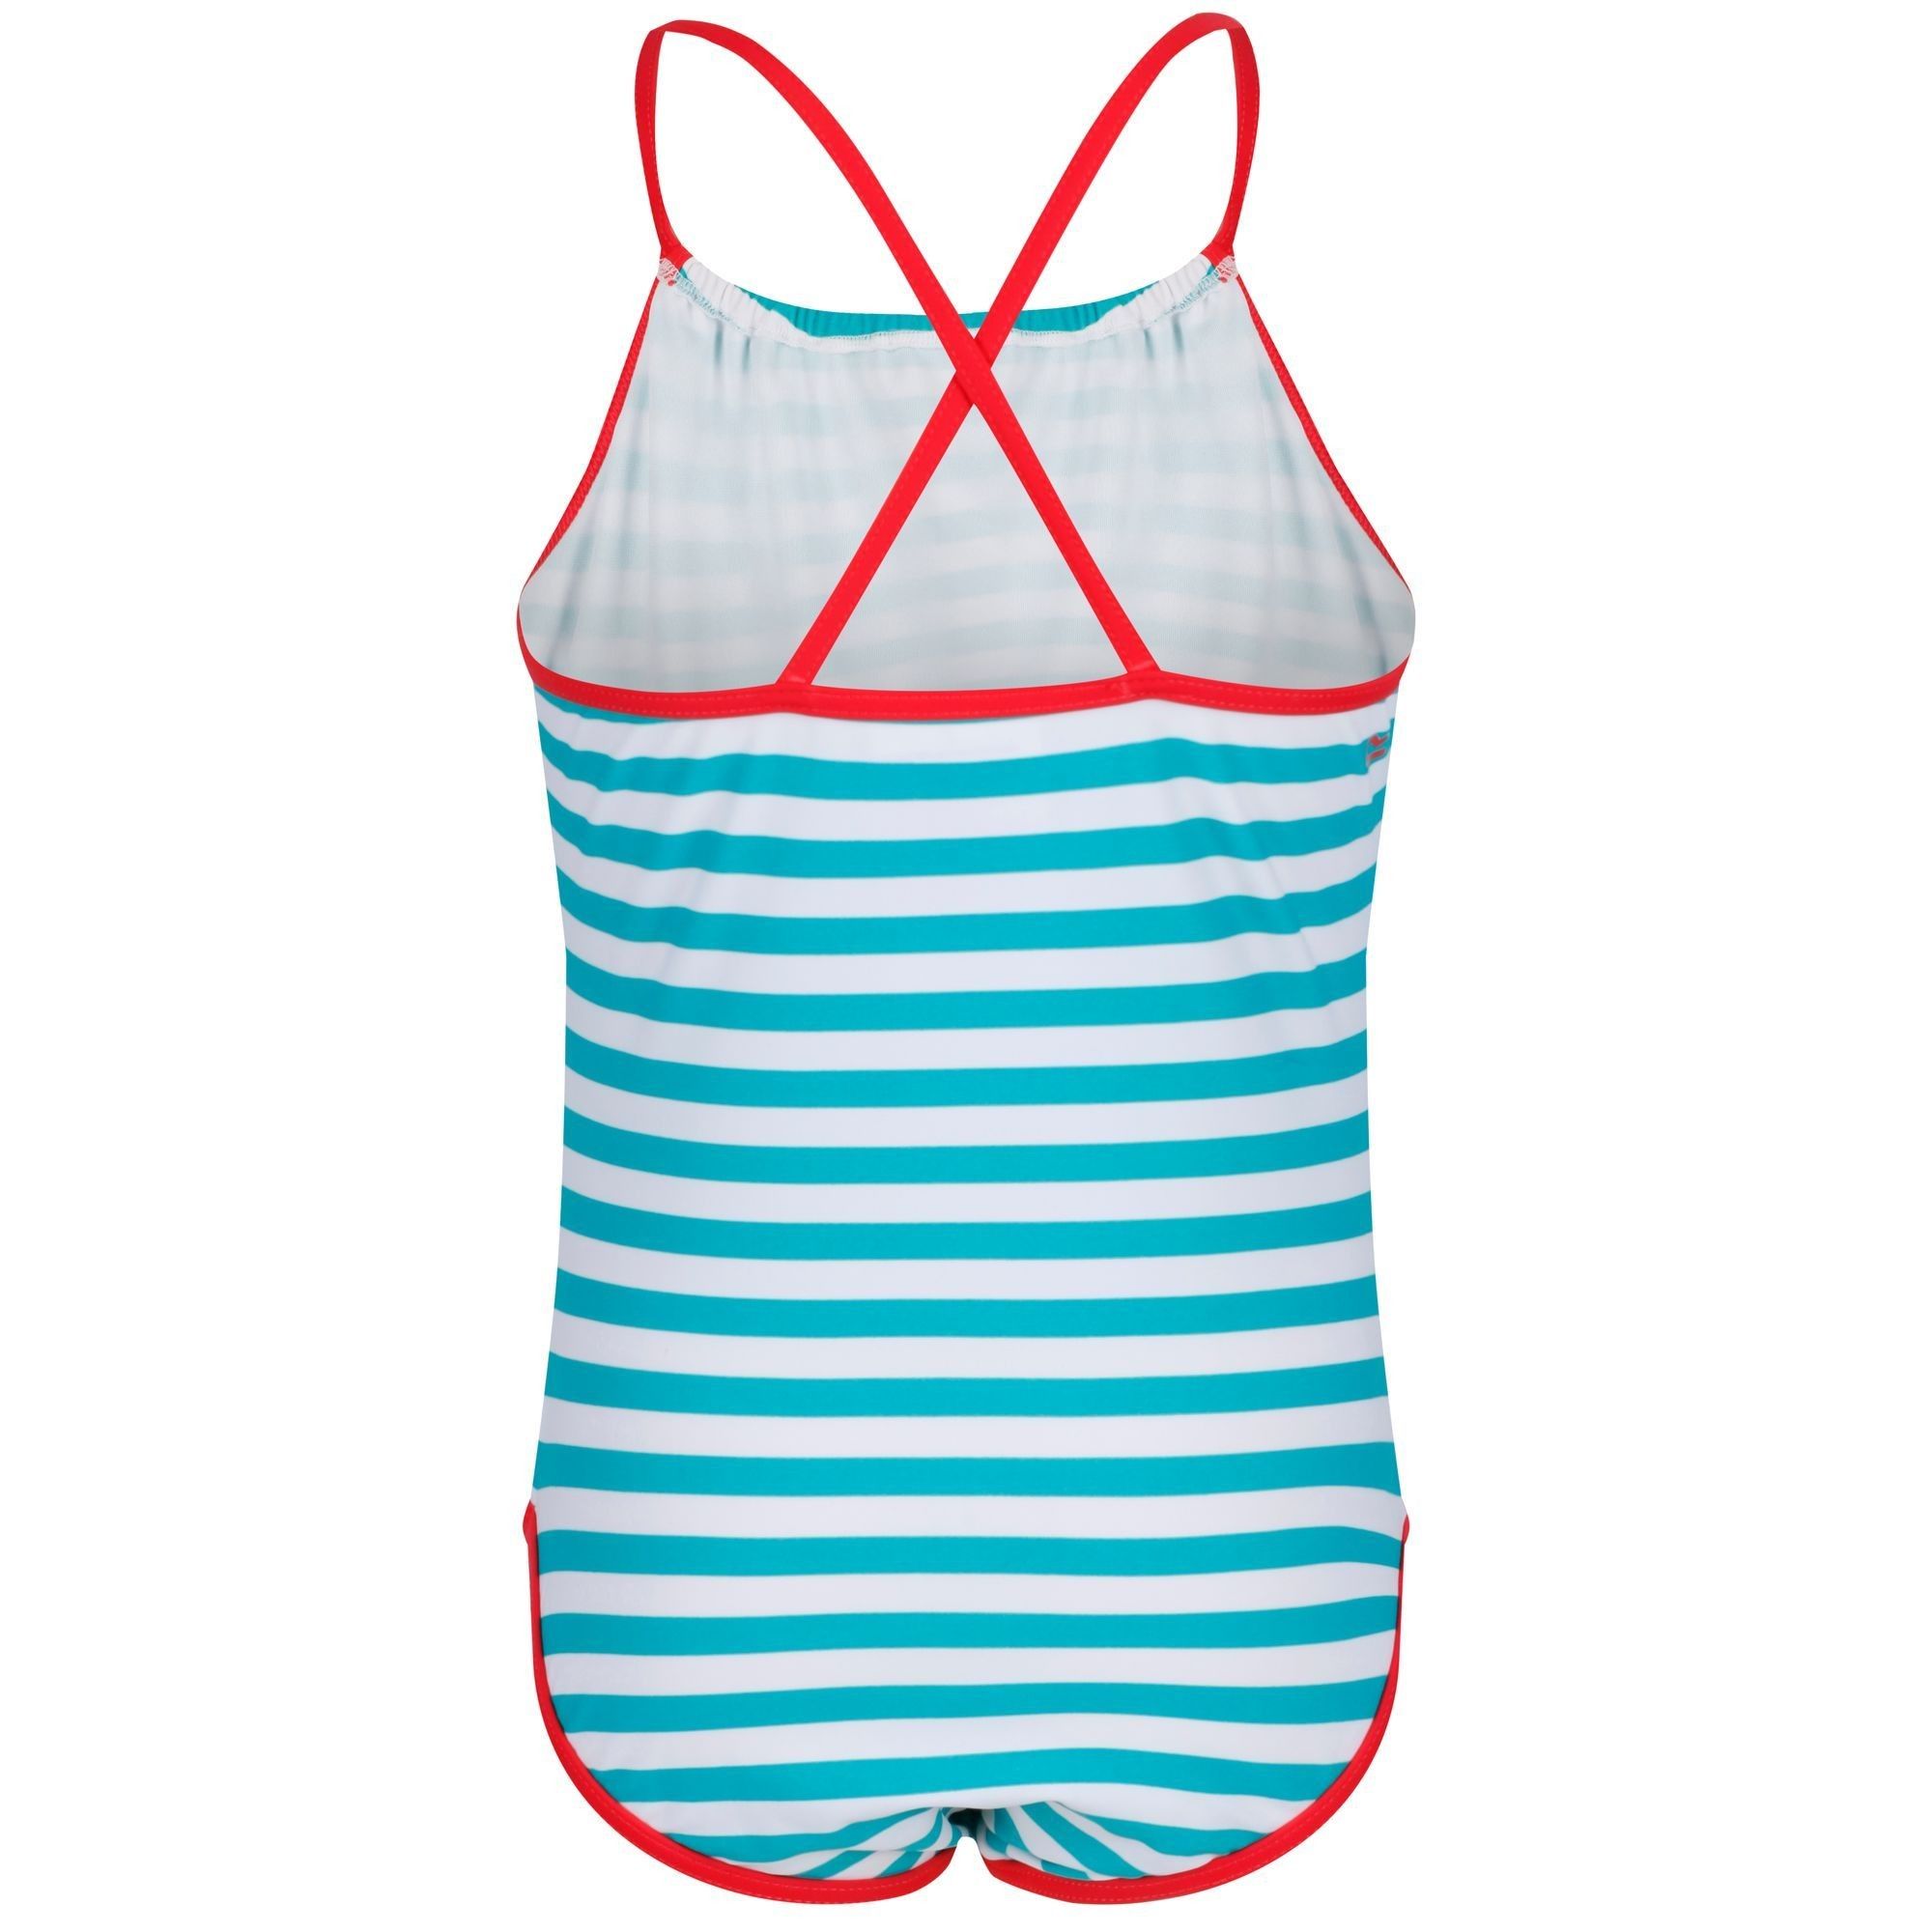 Made with 18% elastane for acrobatic stretch and criss cross back straps. Regatta Kids Sizing (chest approx): 2 Years (53-55cm), 3-4 Years (55-57cm), 5-6 Years (59-61cm), 7-8 Years (63-67cm), 9-10 Years (69-73cm), 11-12 Years (75-79cm), 32